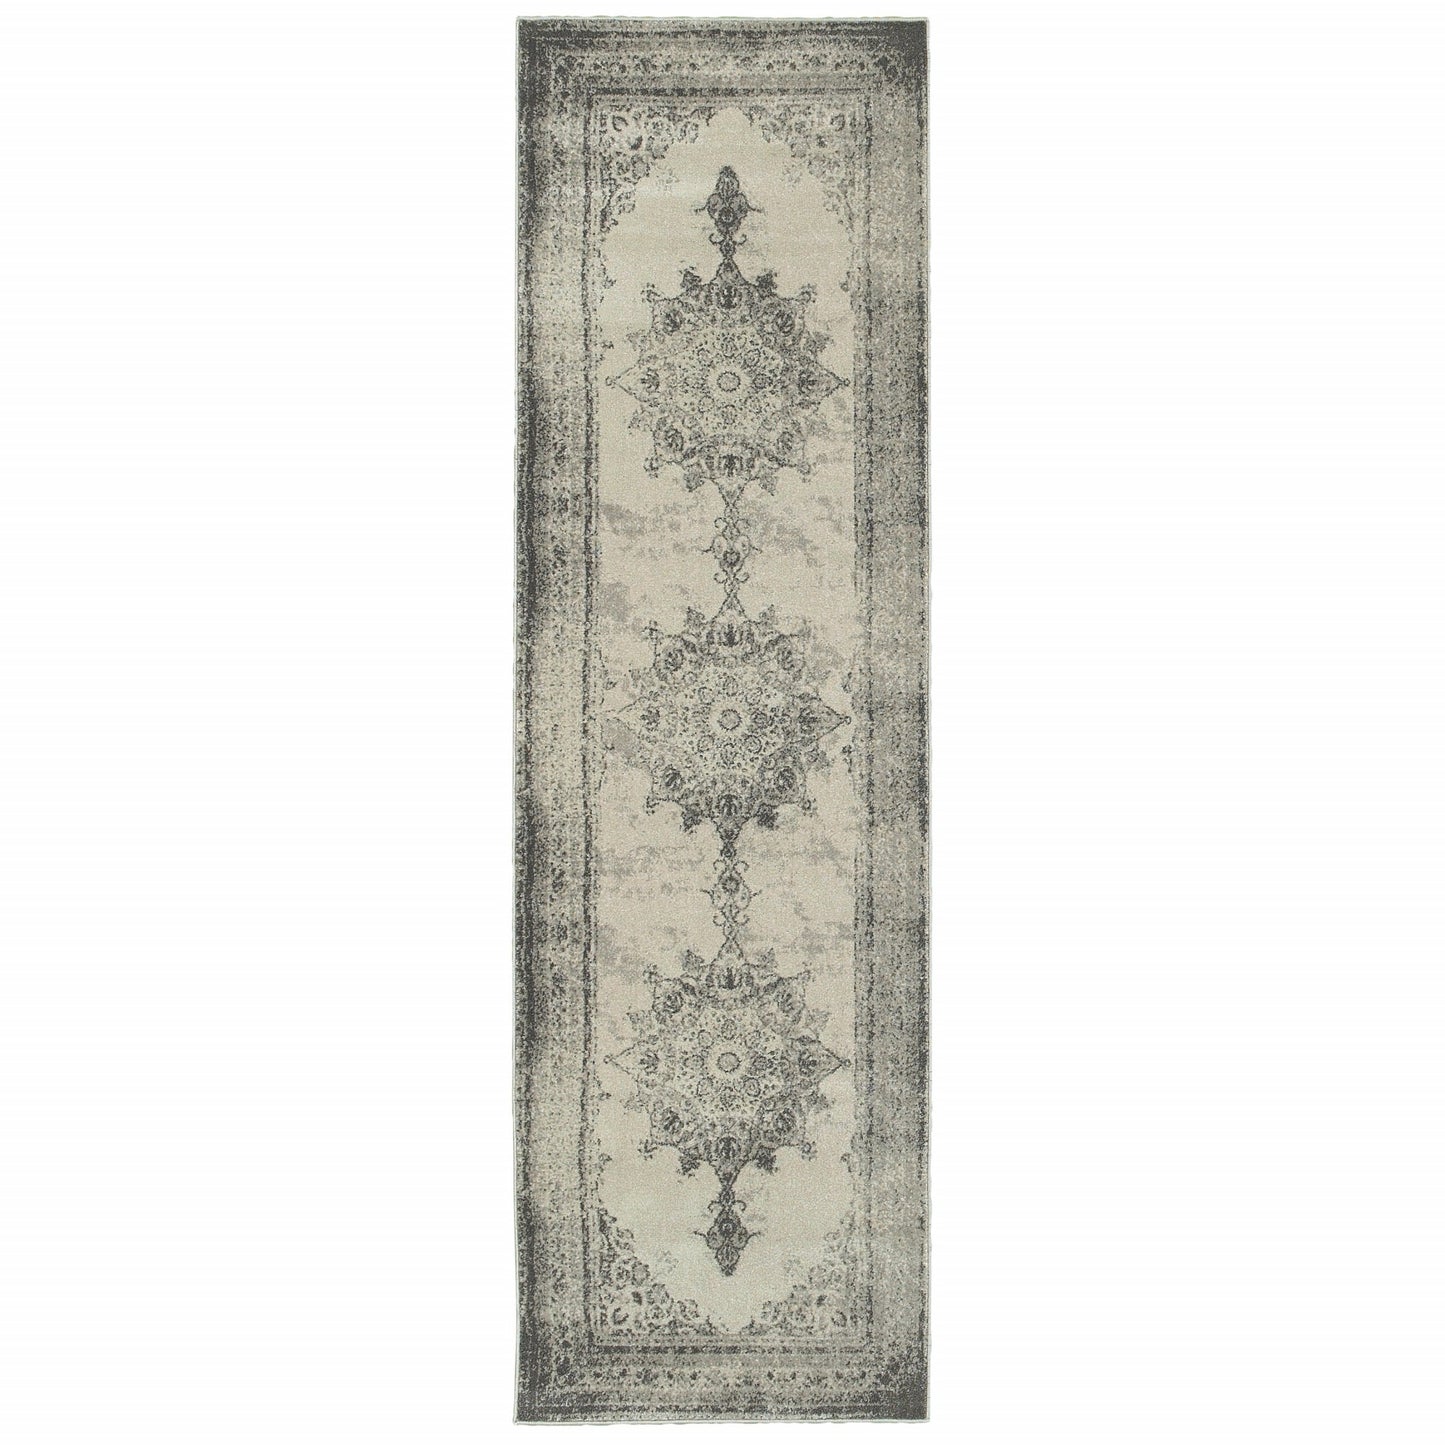 4’X6’ Ivory And Gray Pale Medallion Area Rug